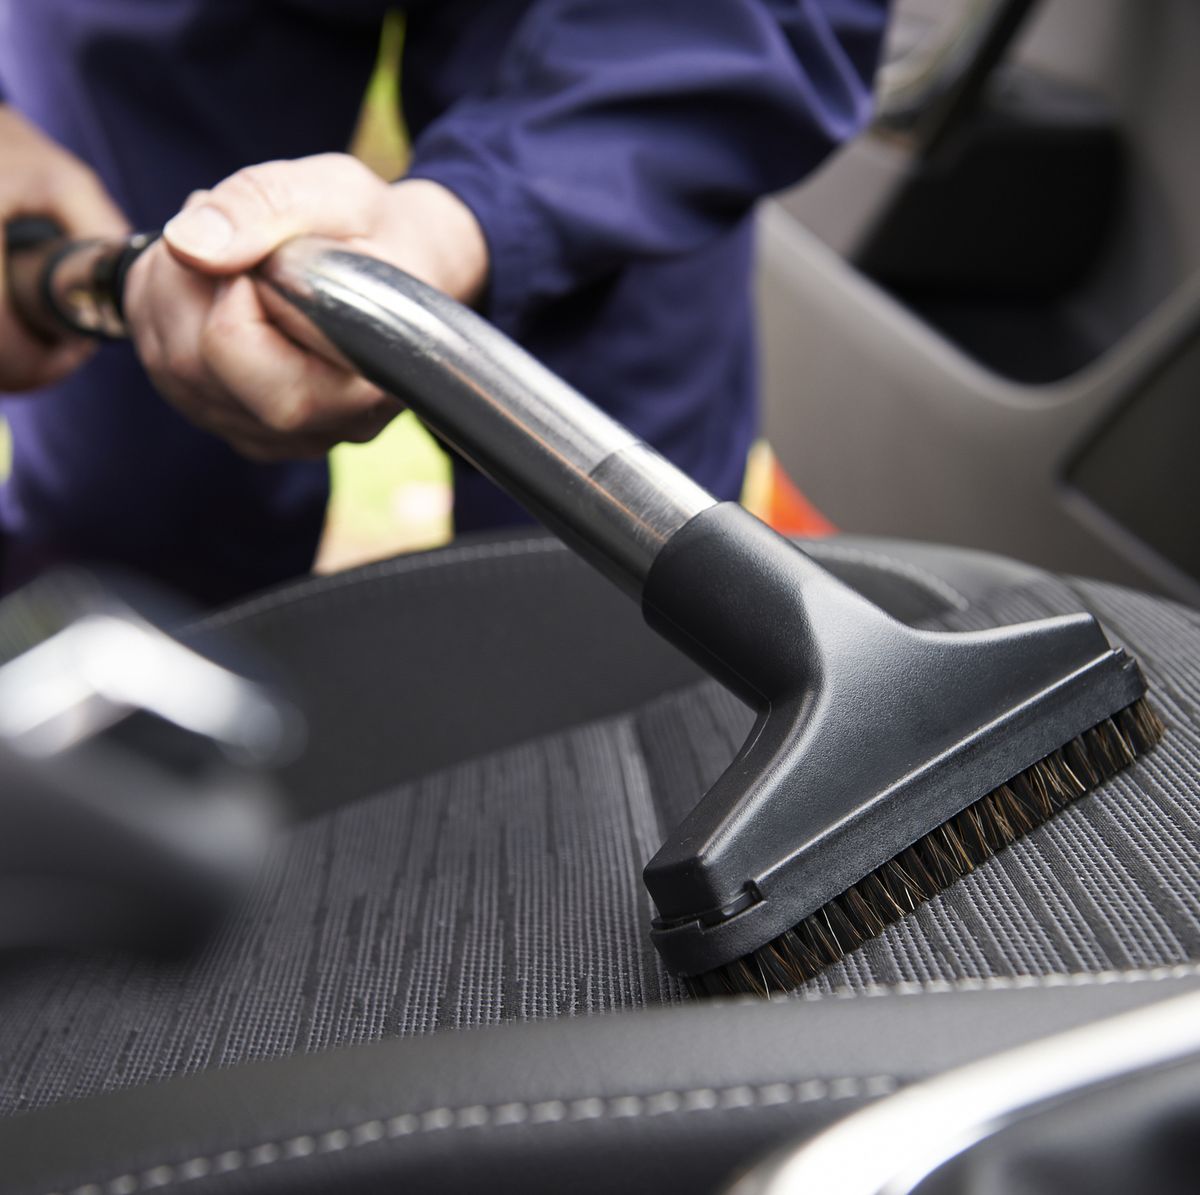 Essential Things to Buy for Car Interior Cleaning